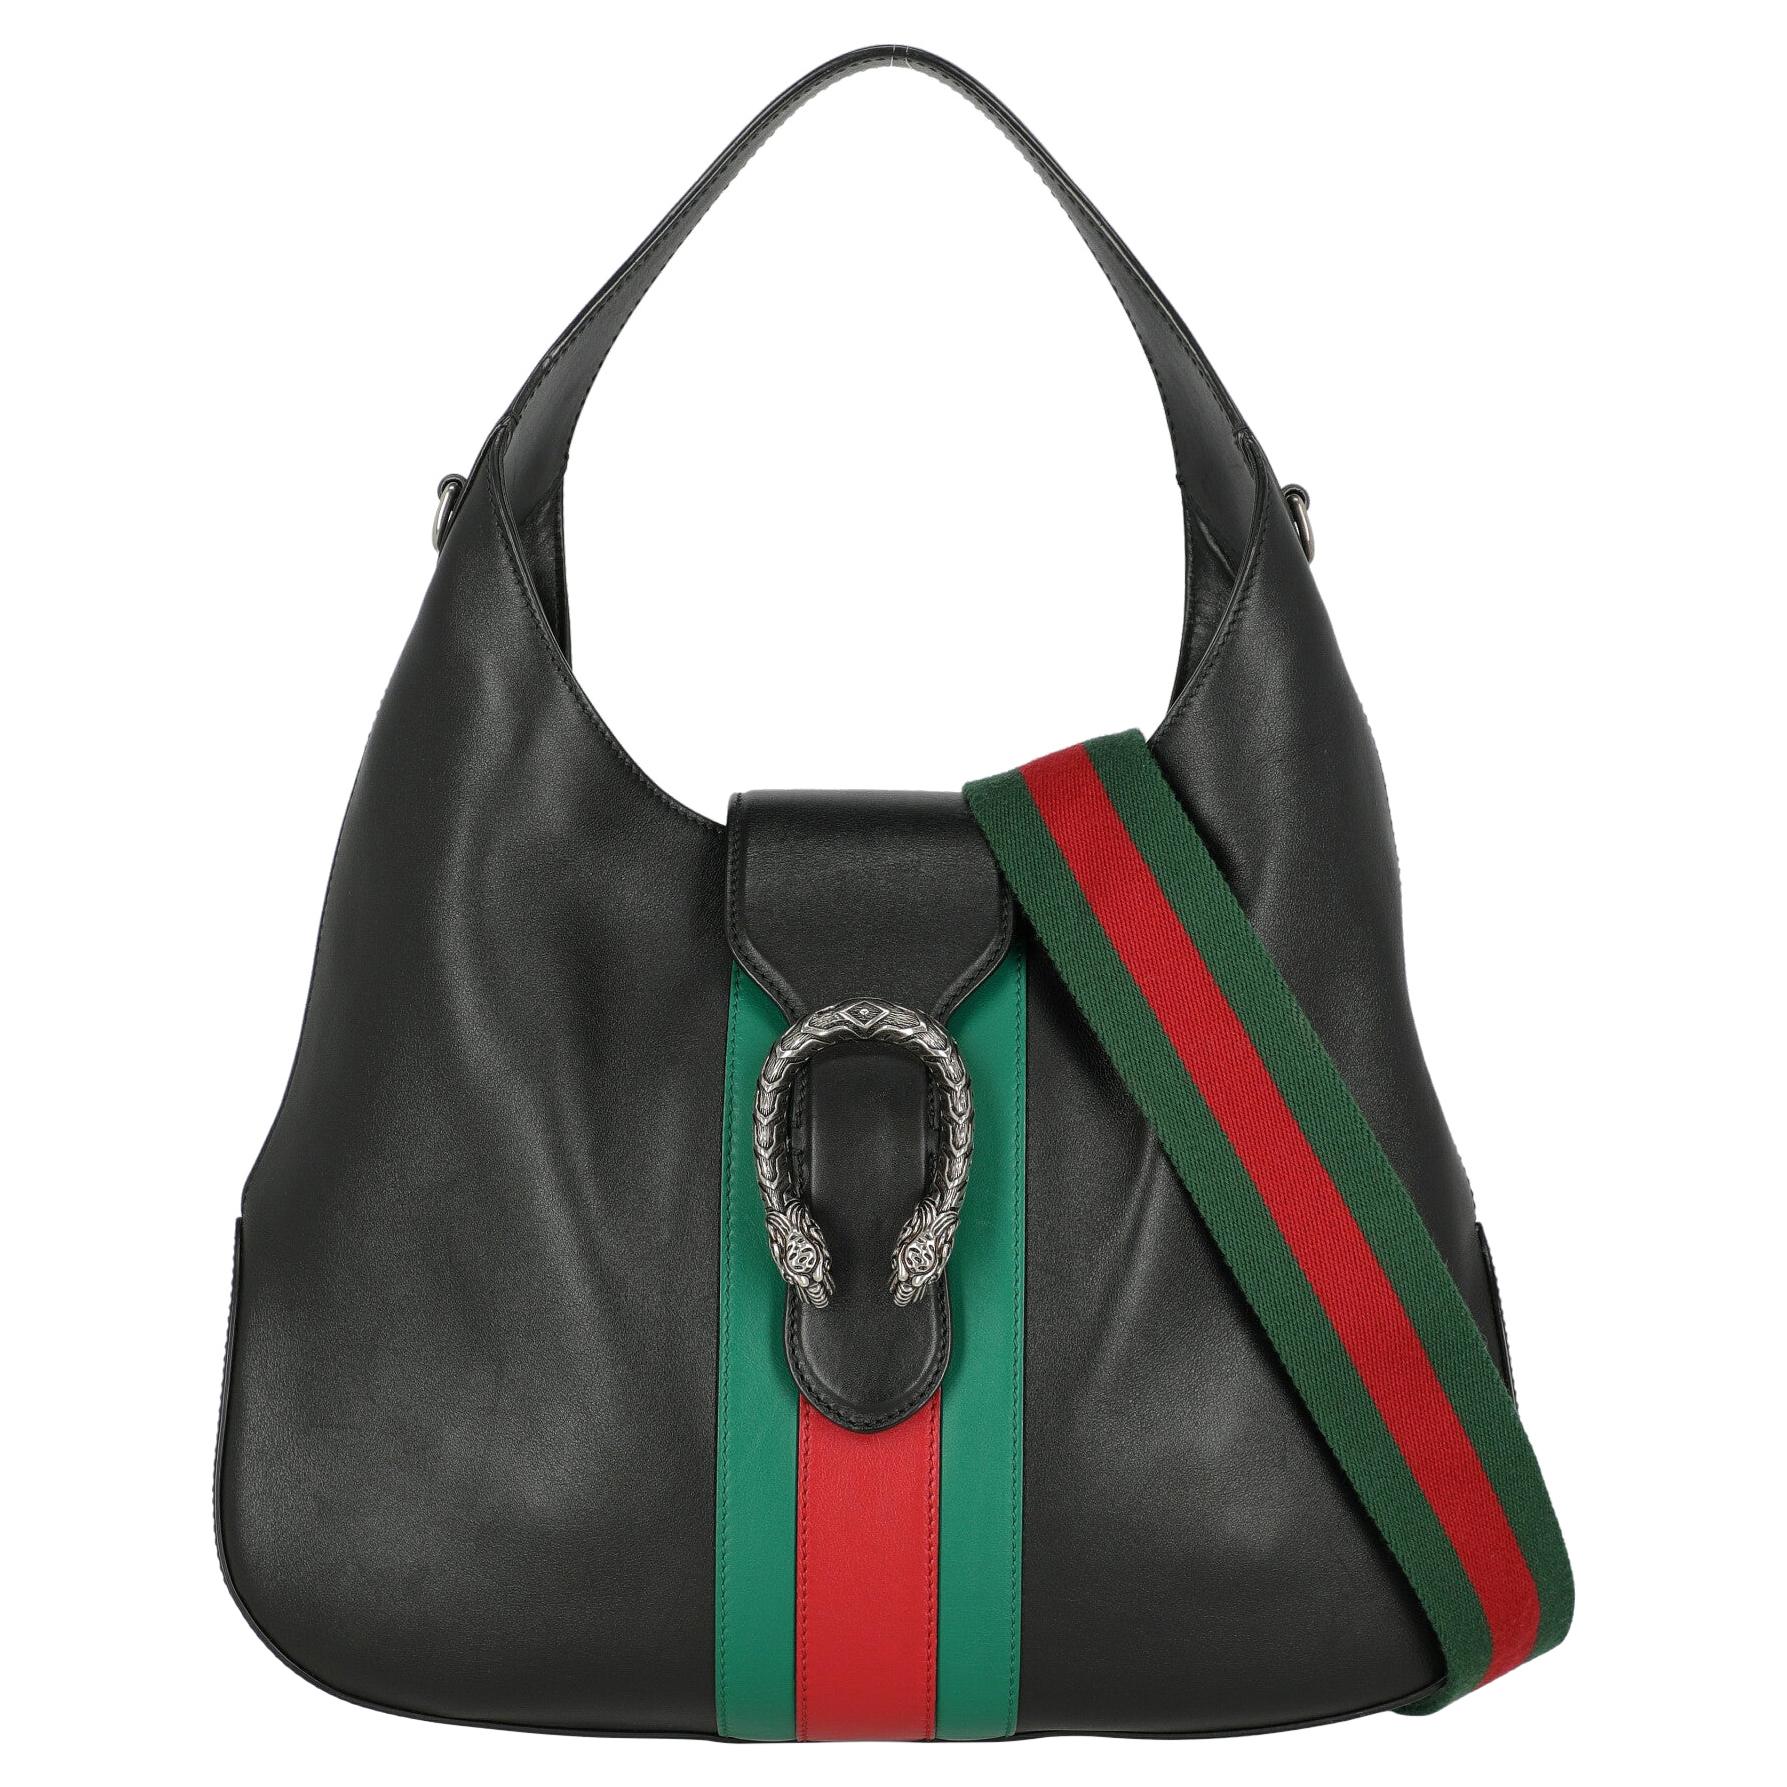 Gucci  Women   Shoulder bags  Black, Green, Red Leather  For Sale